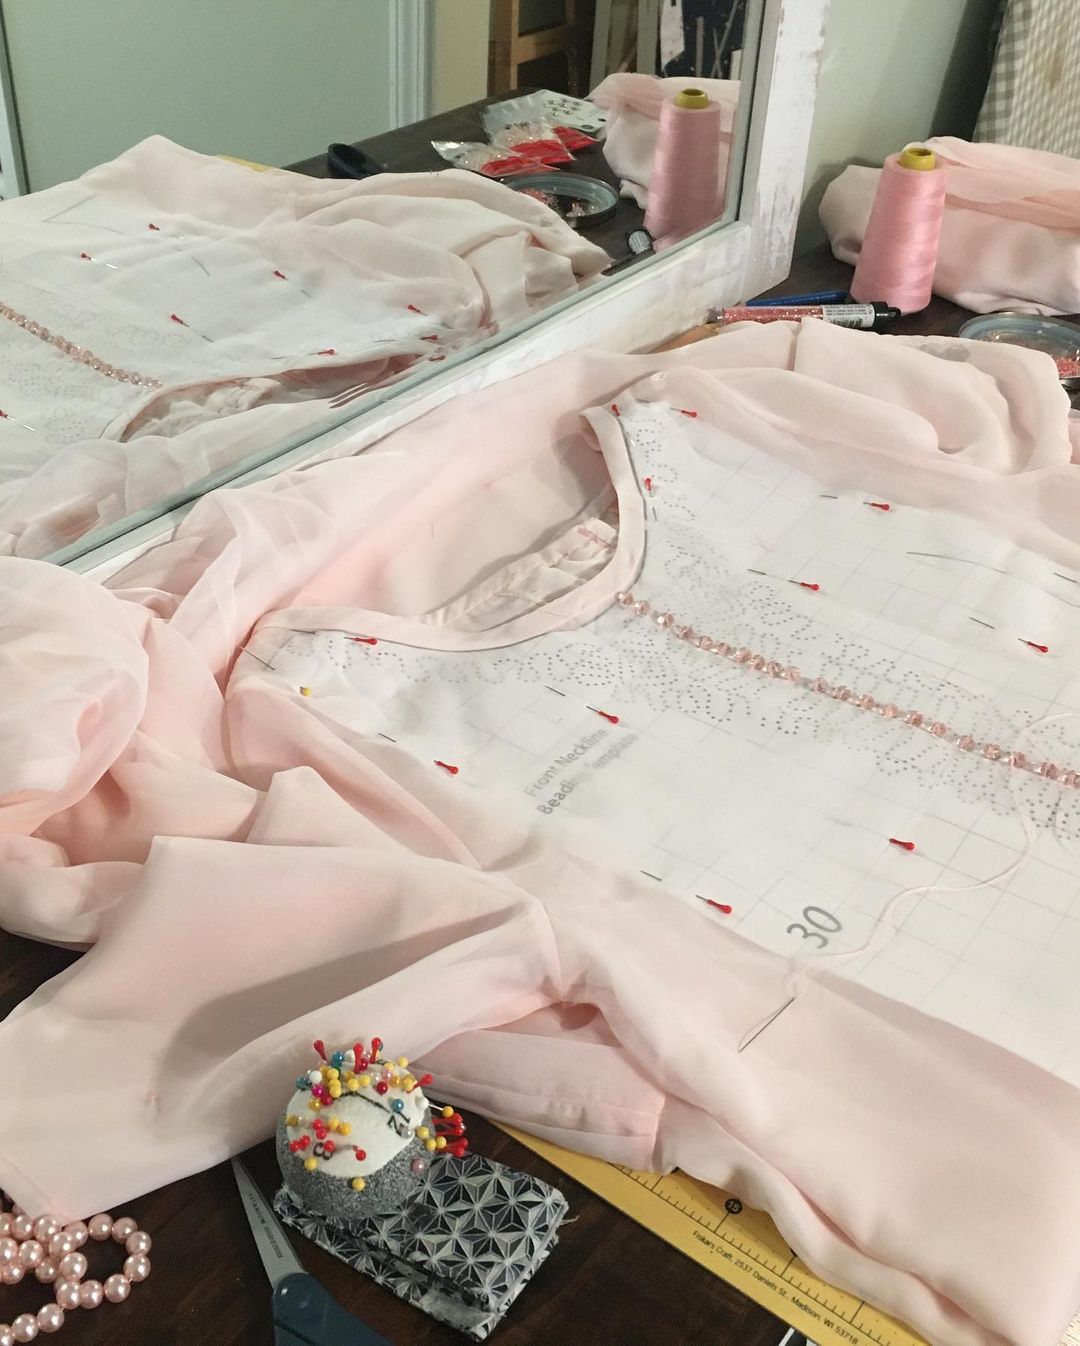 The Refashioned Dress (process) by @mia_dulceaphel8